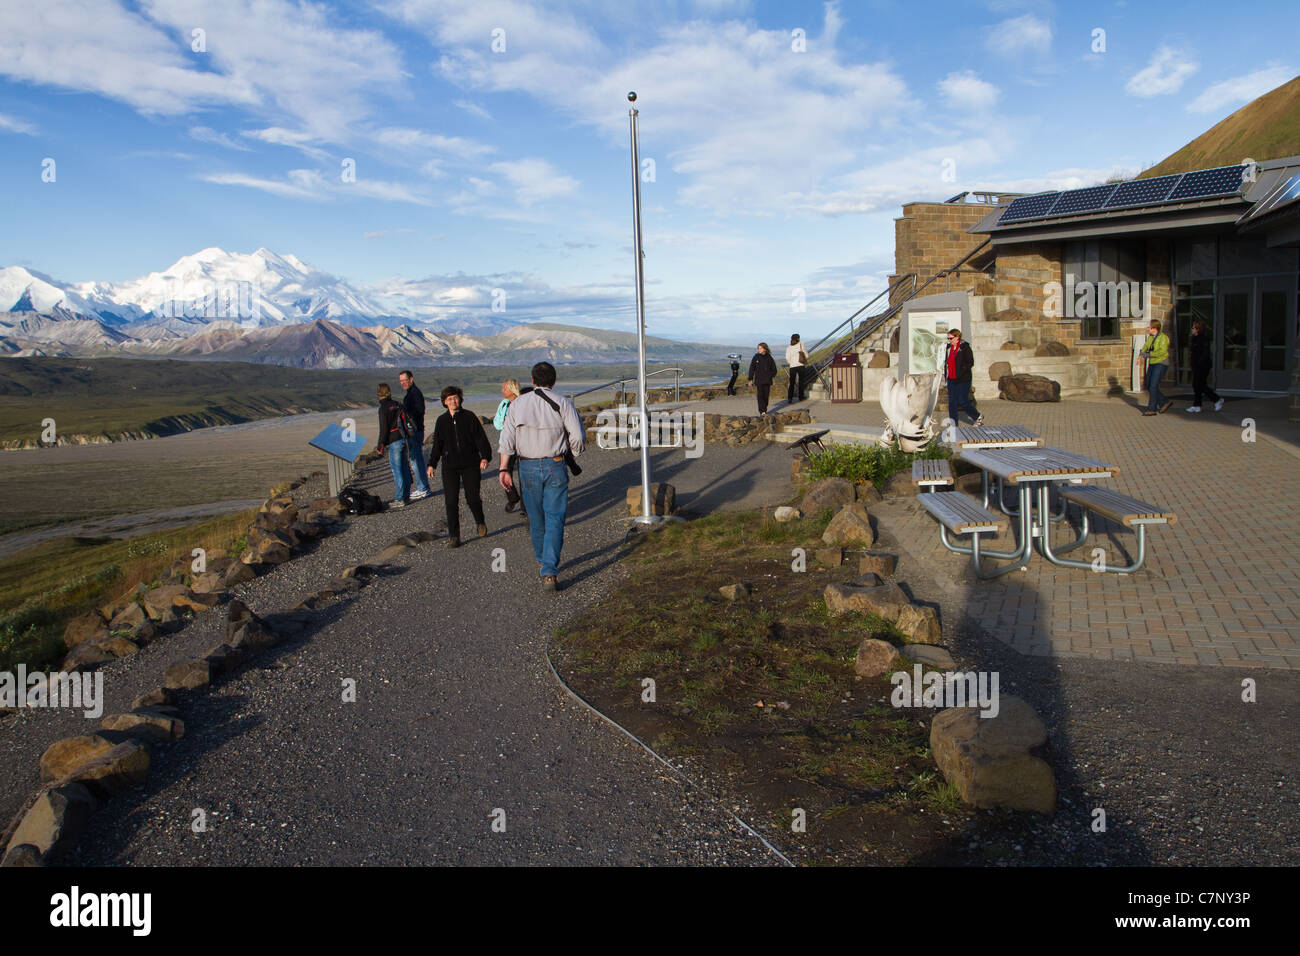 Tourists enjoy a sunny morning at Eielson Visitor Center with Denali (Mt. McKinley) in the background, Denali National Park, AK. Stock Photo